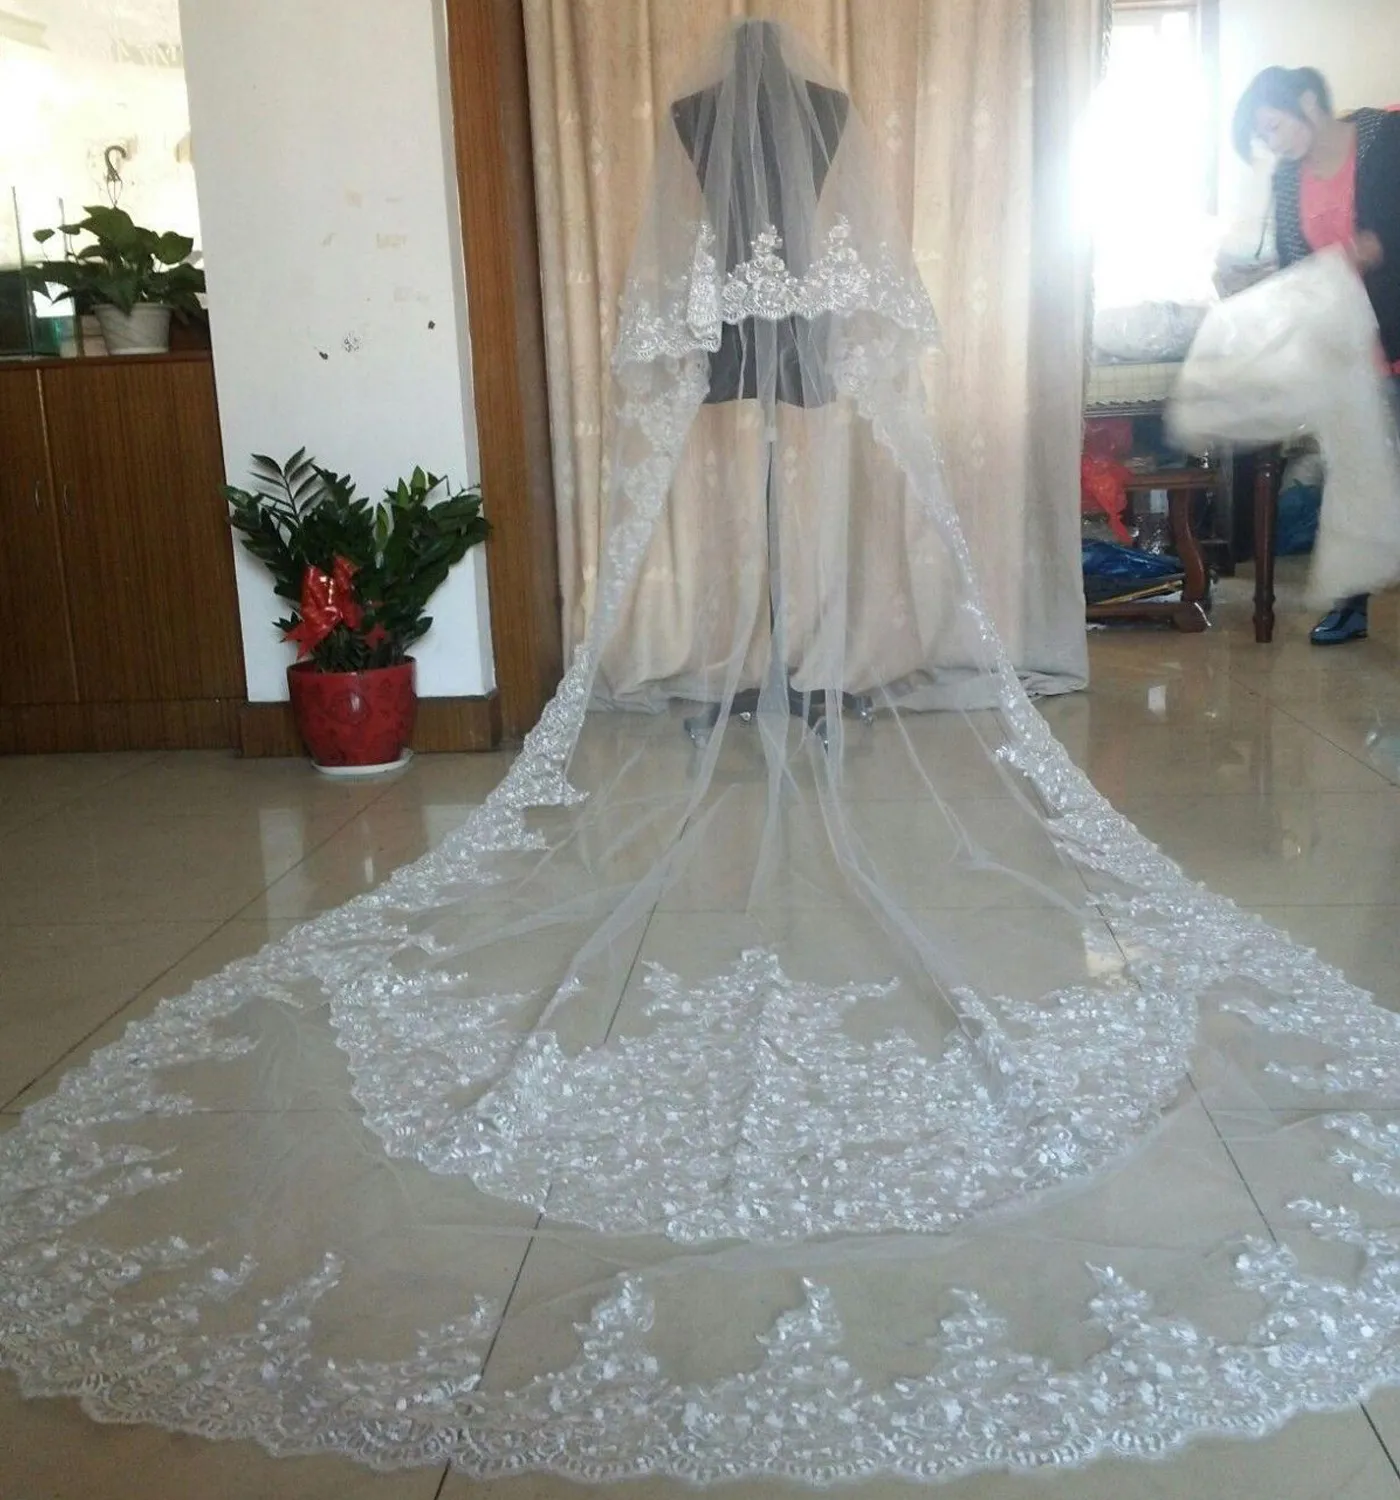 Custom-made Stunning Beaded Wedding Veils 2016 Eifflebride with Embellished Lace Applique Edge Two Layer About 3 Meter Long Bridal Veils